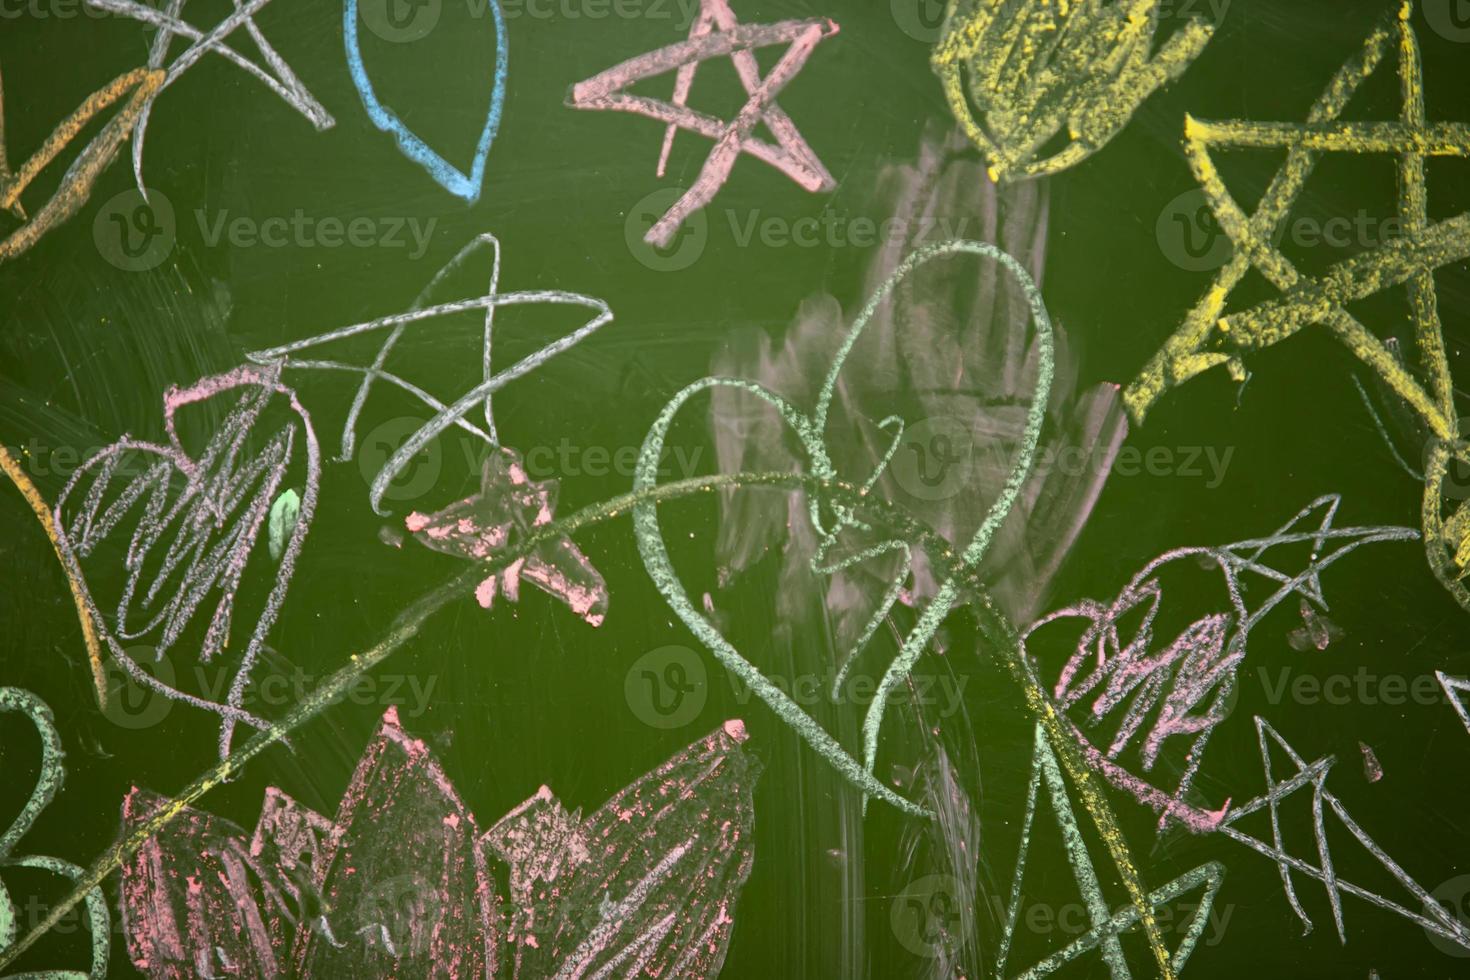 Drawings of children with chalk on a school green board. photo